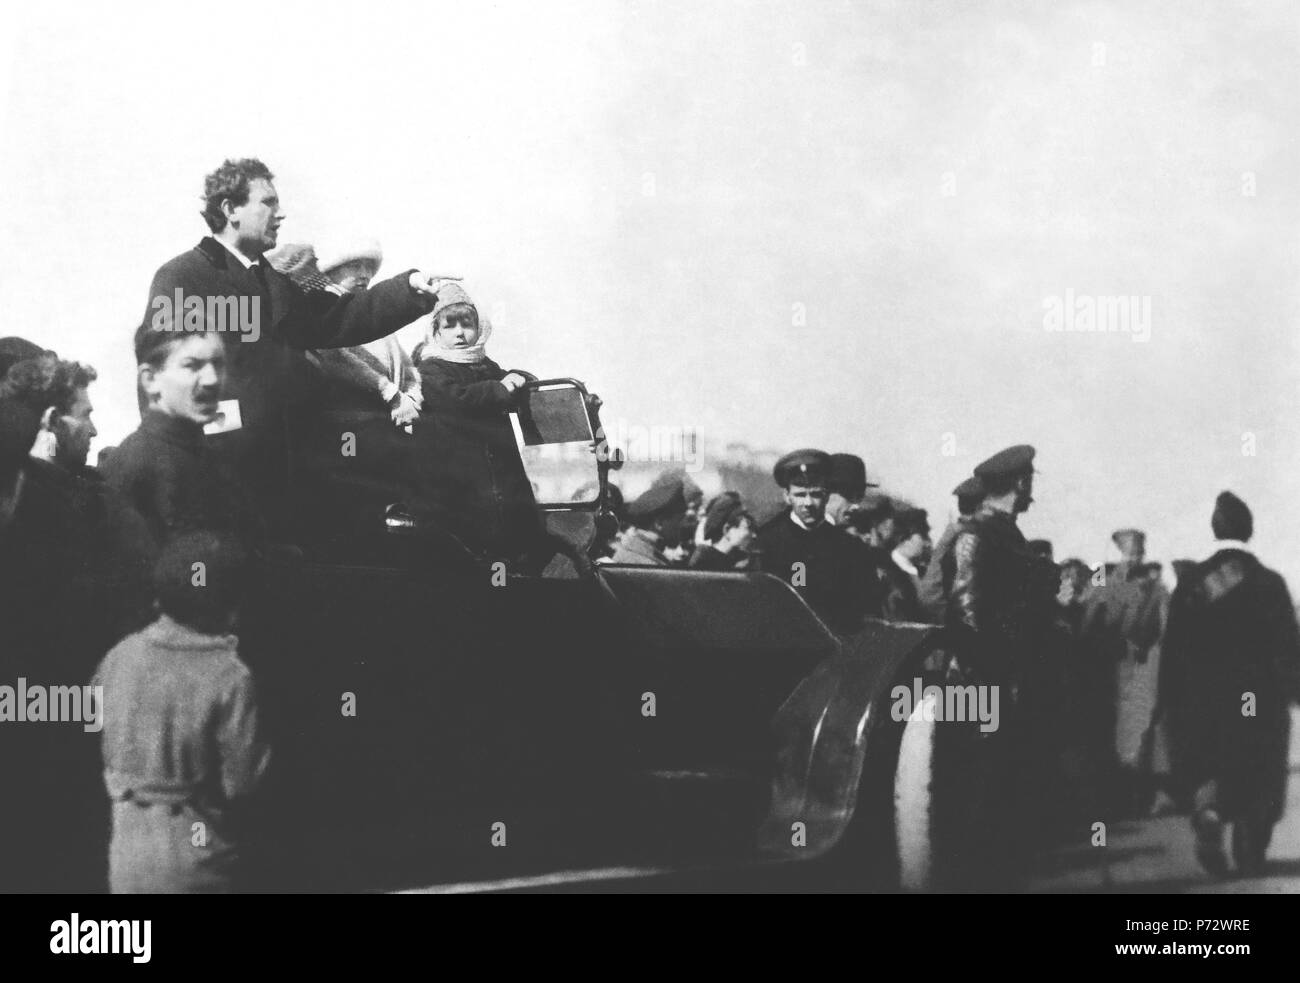 English: Grigory Zinoviev, Chairman of The Petrograd Soviet addresses the crowd on the first International Workers' Day after the October Uprising (the Bolshevik Revolution). Date: May 1 1918. Place: Fields of Mars, Petrograd. Context: Zinoviev was one of the seven leaders of the first Politburo, founded in 1917 in order to manage the Uprising in 1917: Lenin, Trotsky, Zinoviev, Kamenev, Stalin, Sokolnikov, and Bubnov. He became the Chairman of the Executive Committee of the Comintern when it was created in March 1919 to spread the uprising worldwide. Grigory Zinoviev was executed in 1936, foll Stock Photo